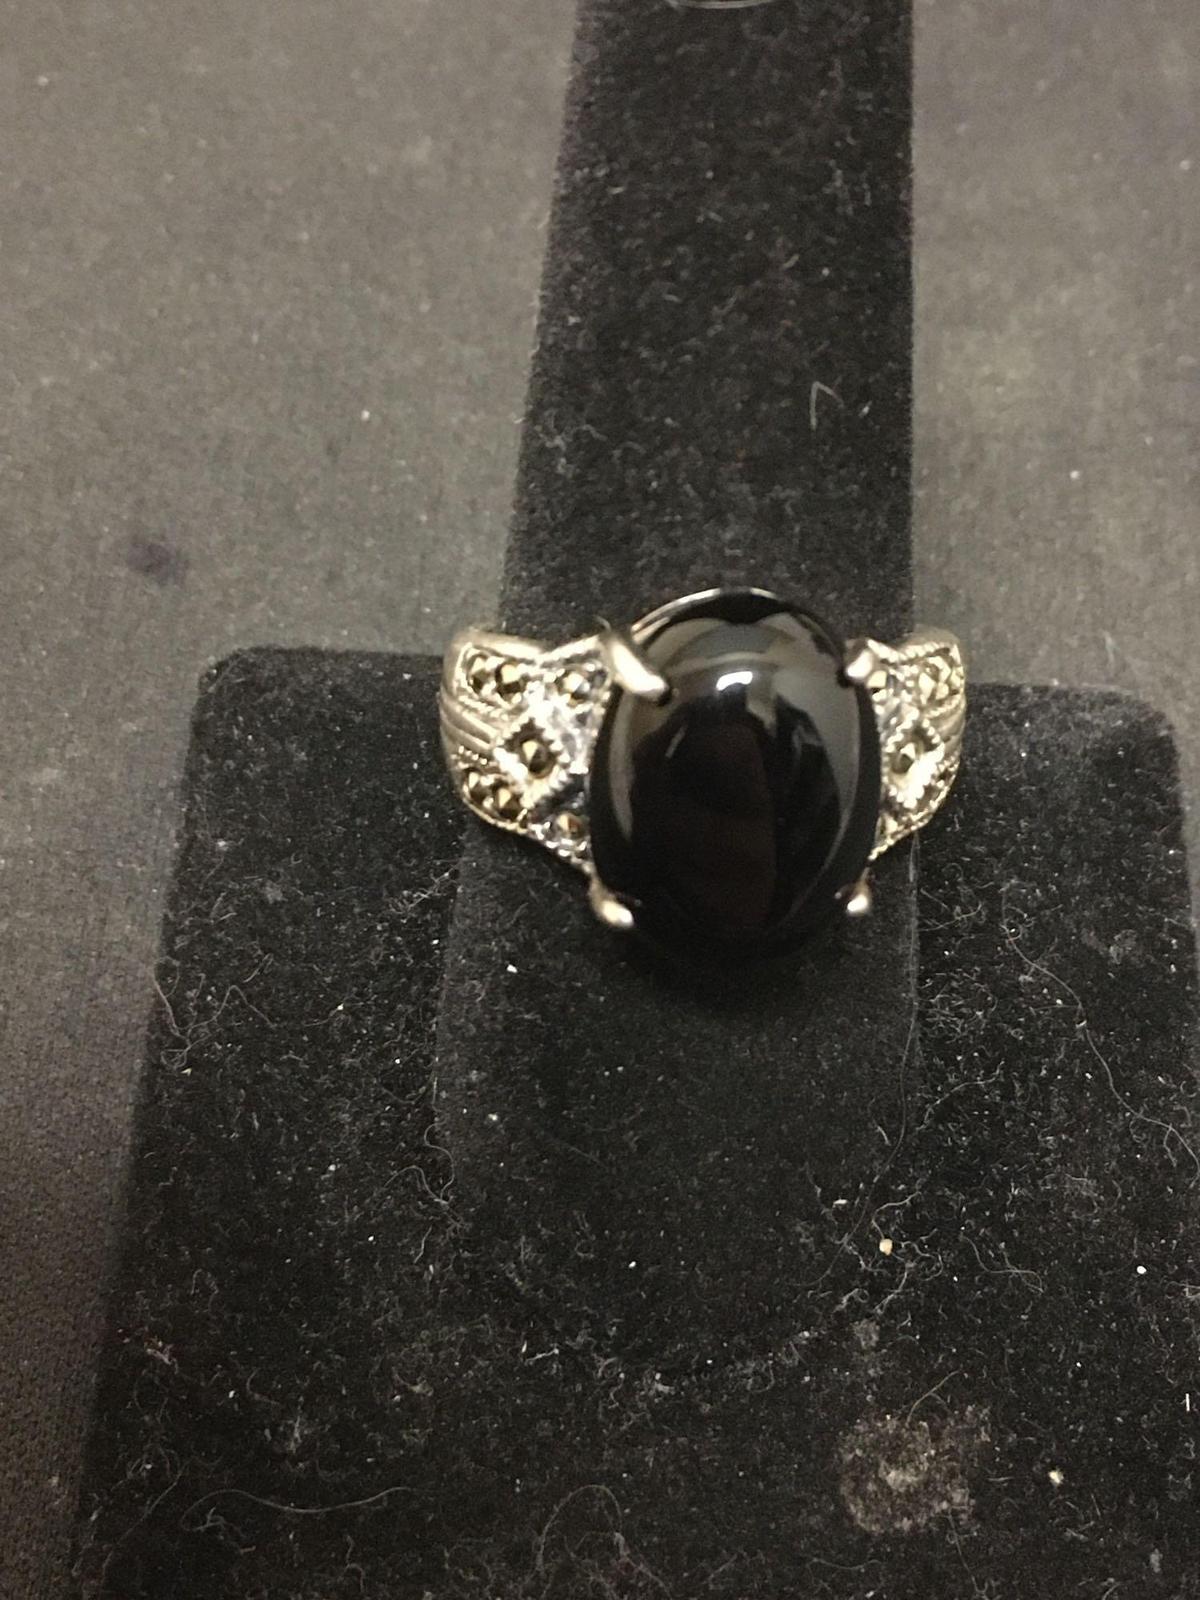 AVON Marcasite & Black Onyx Sterling Silver Cocktail Ring Sz 9